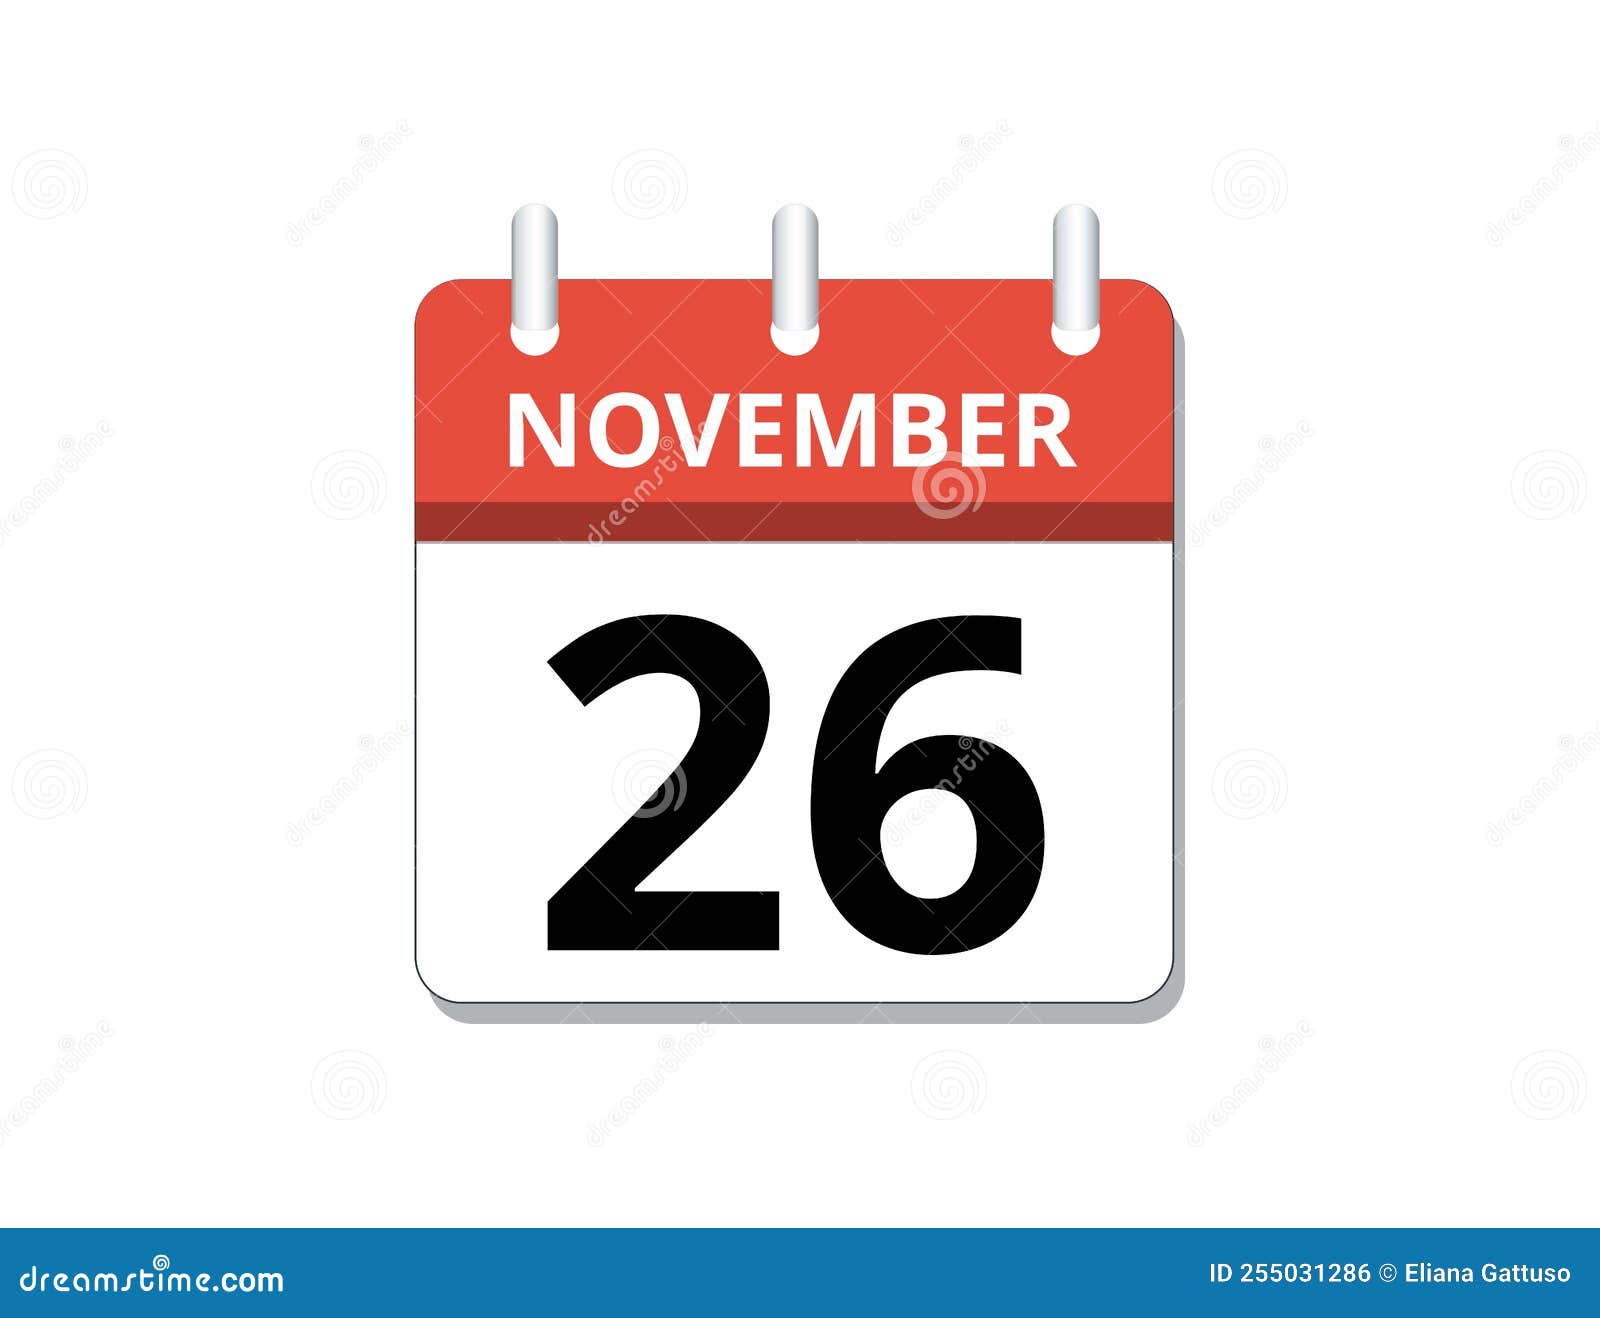 November, 26th Calendar Icon Vector, Concept of Schedule, Business and